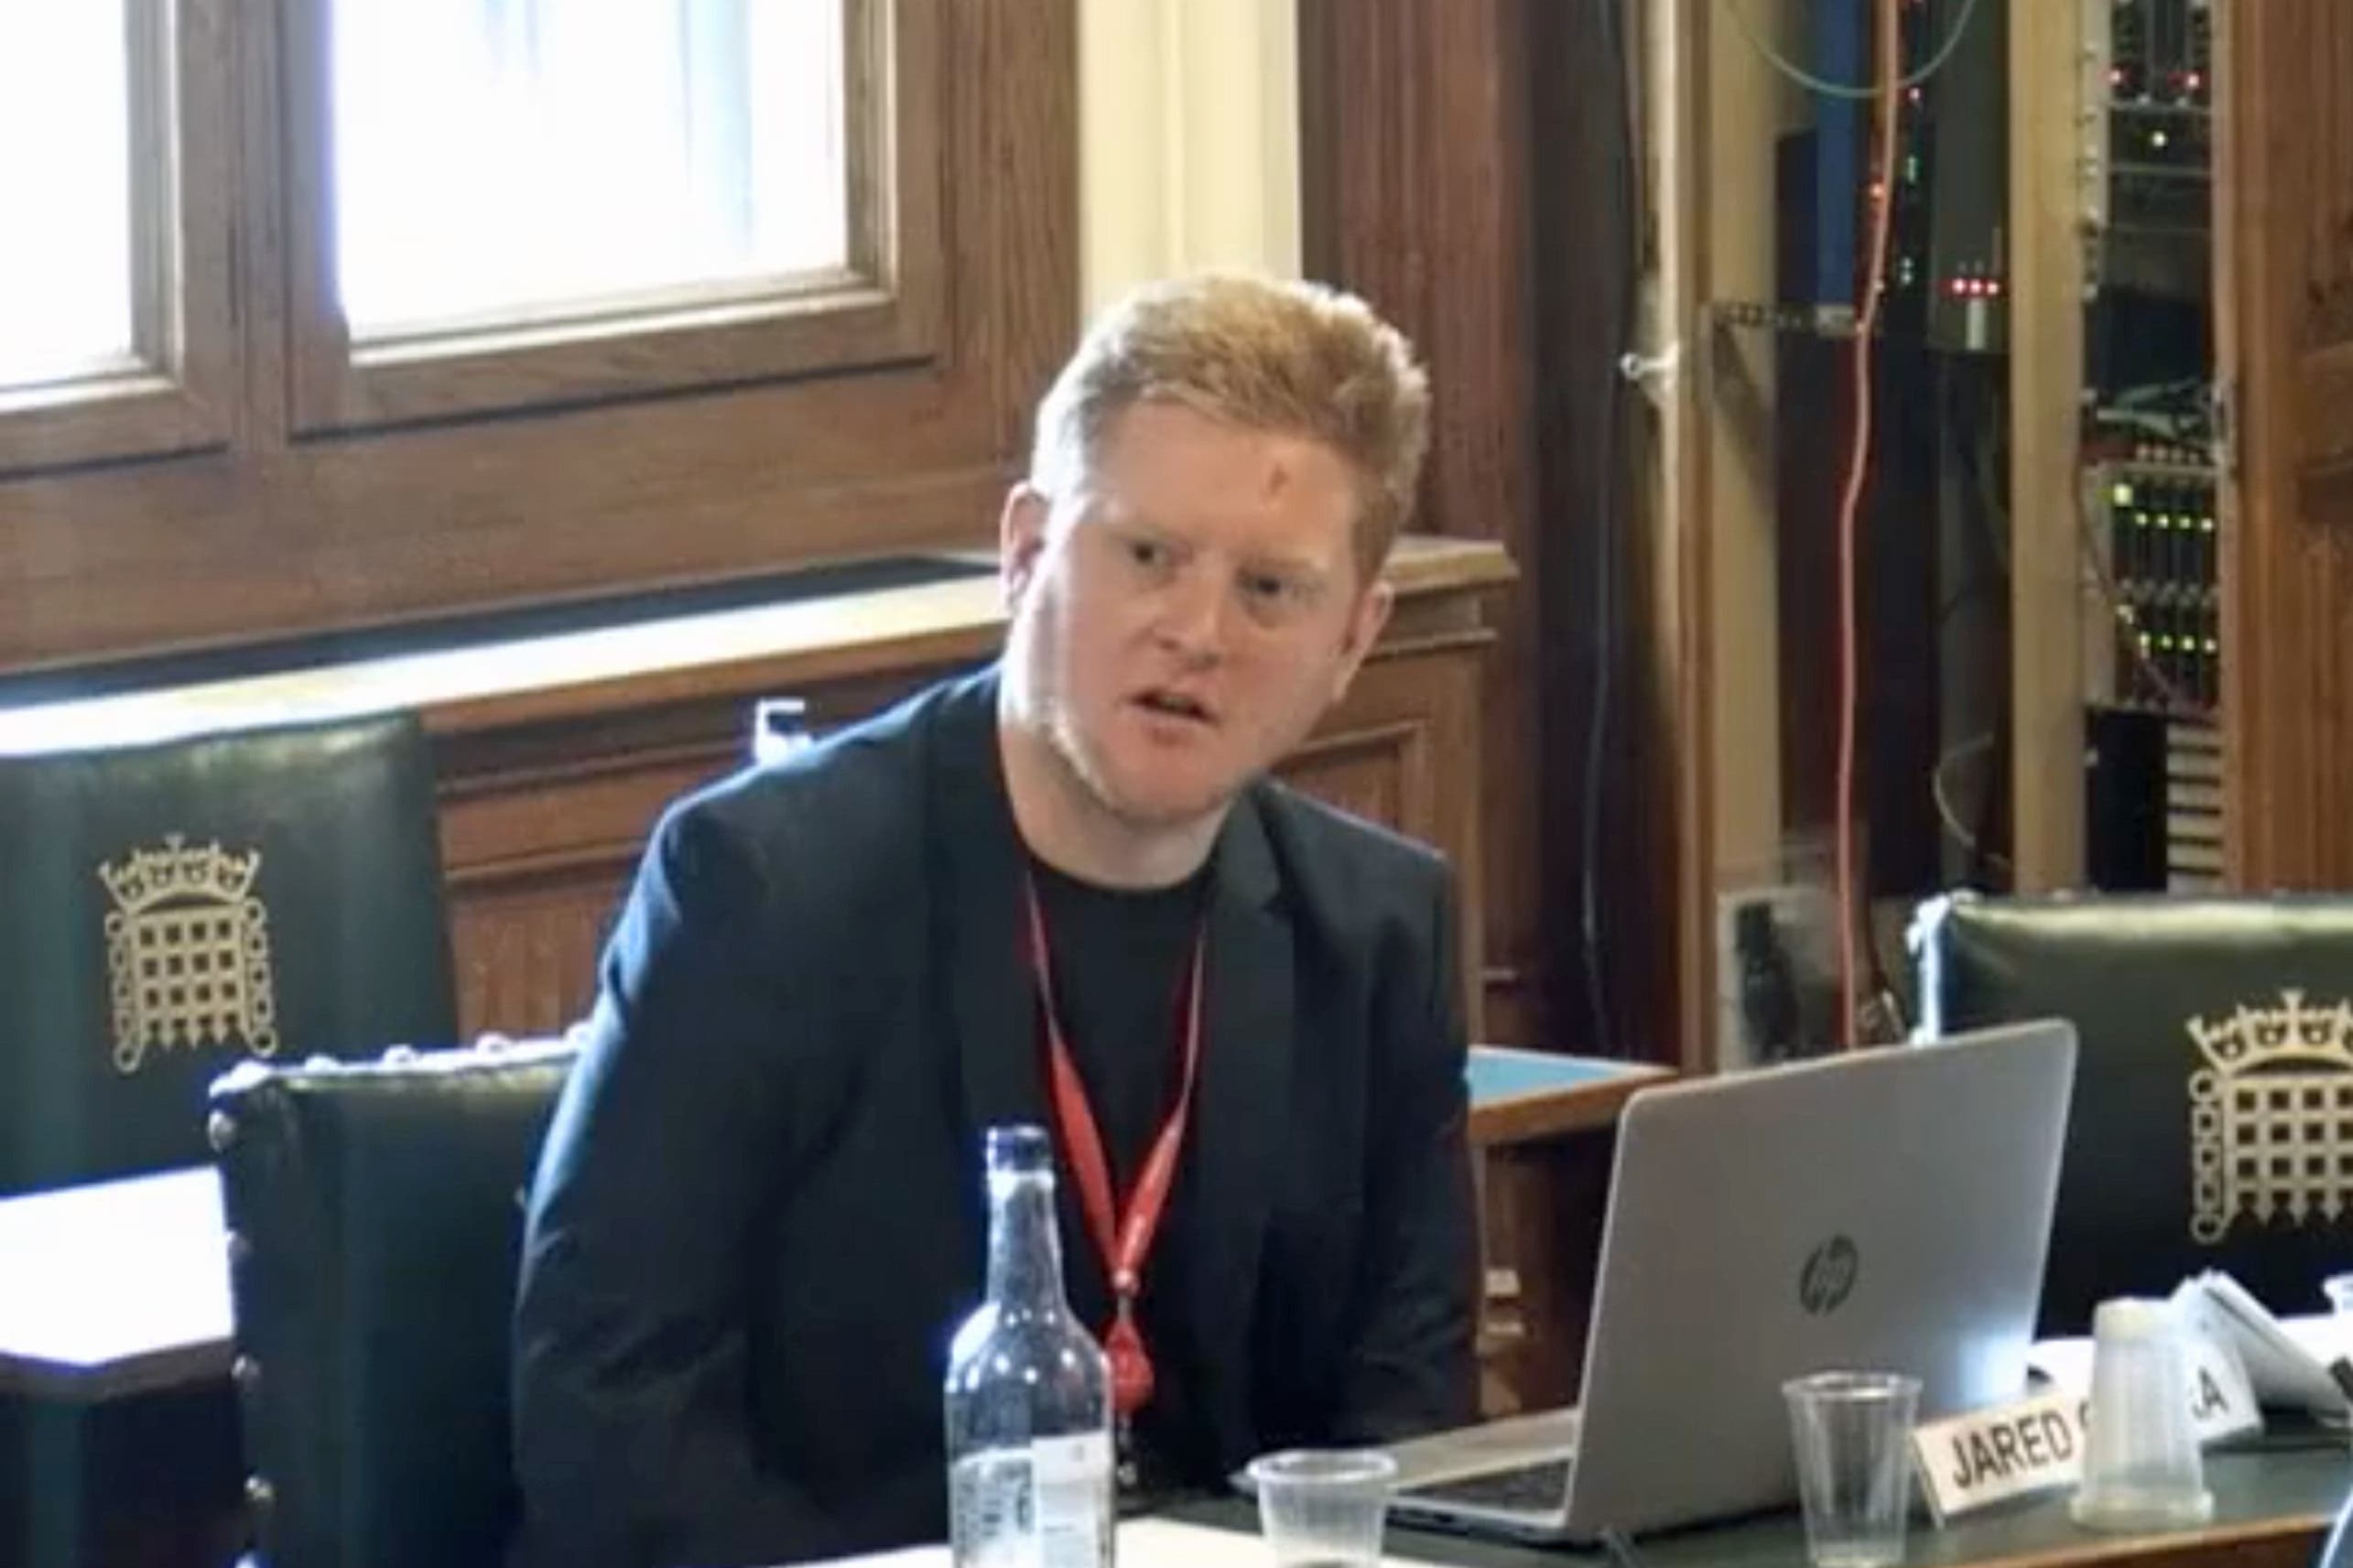 Jared O’Mara represented the constituency of Sheffield Hallam from 2017 to 2019